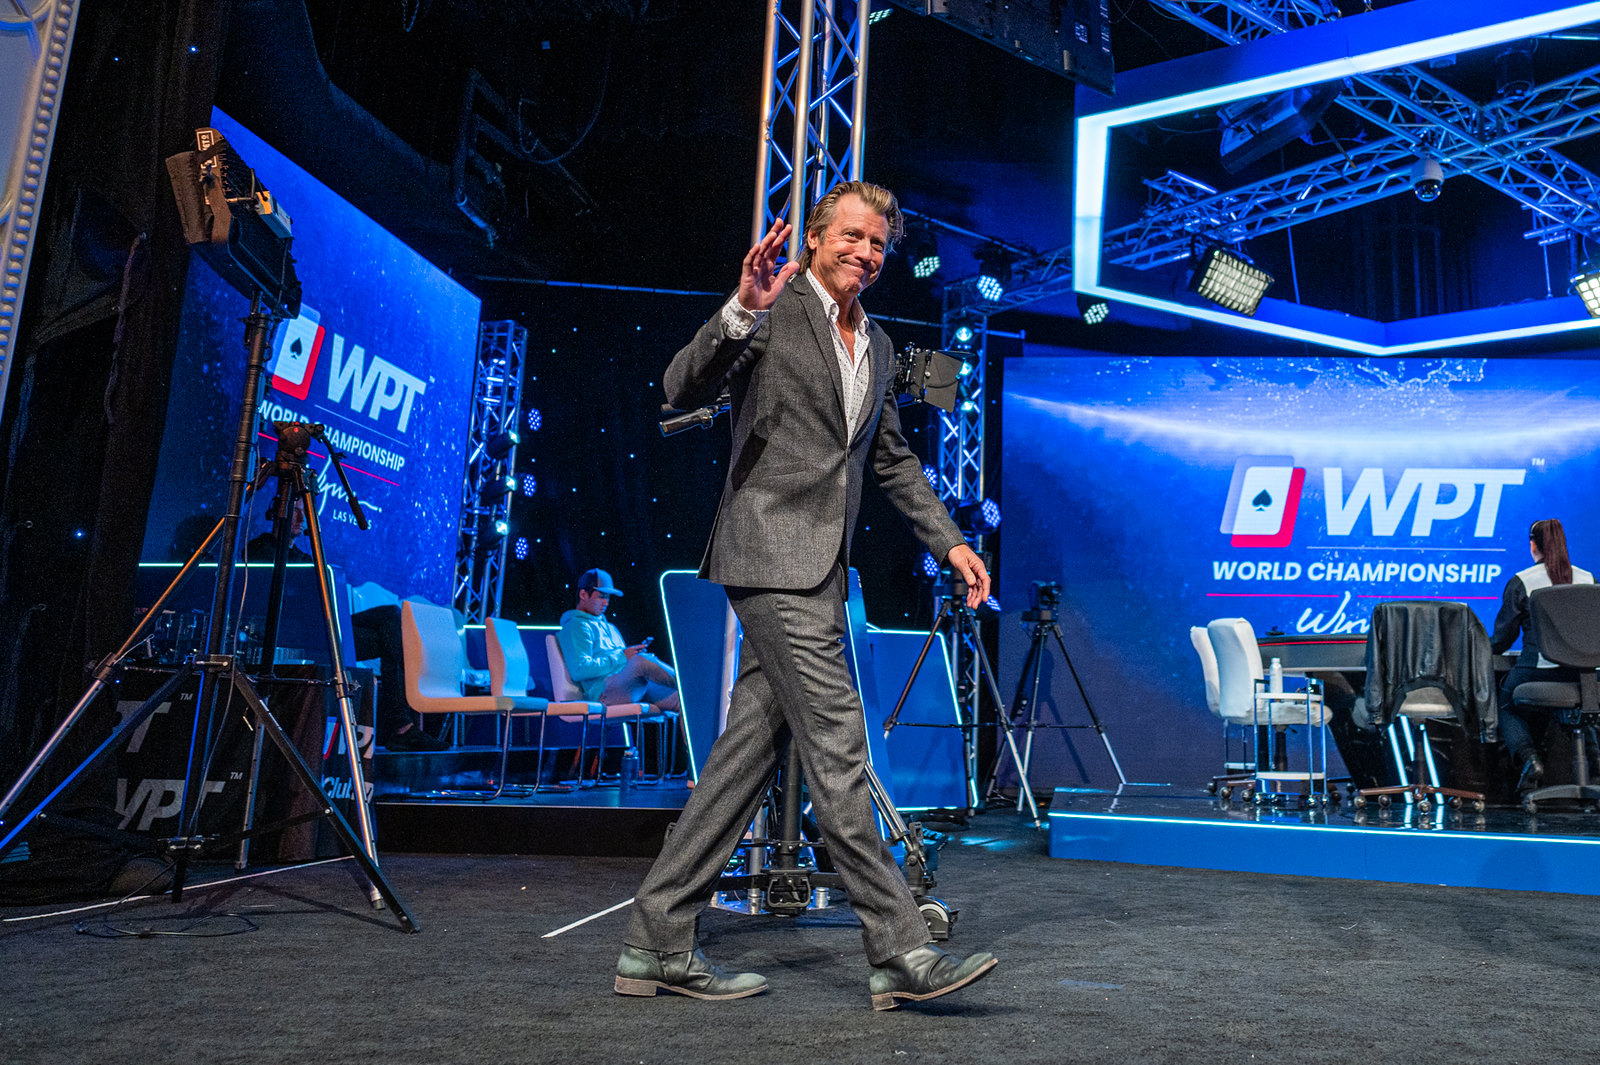 Who's Who of Poker Shows Up on Day 1a of Historic WPT World